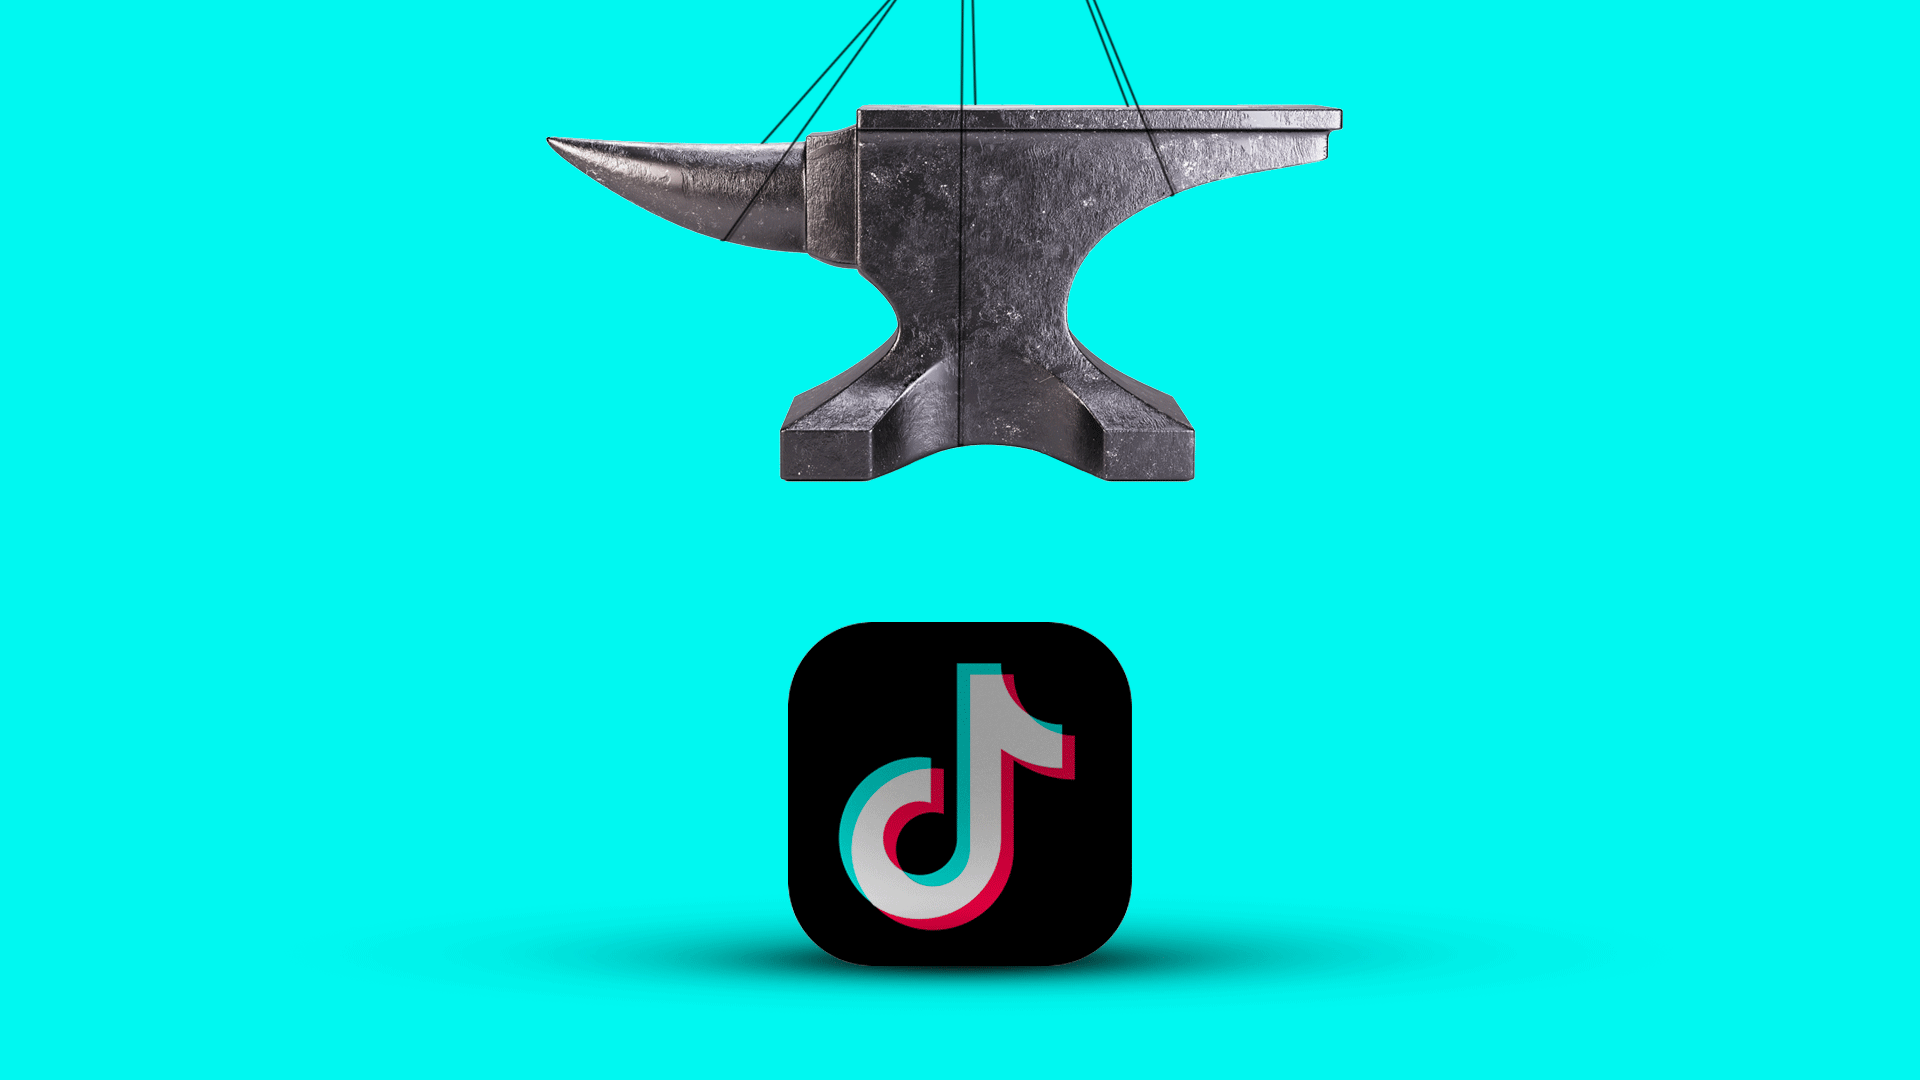 Illustration of an anvil swaying back and forth above the Tik Tok app icon